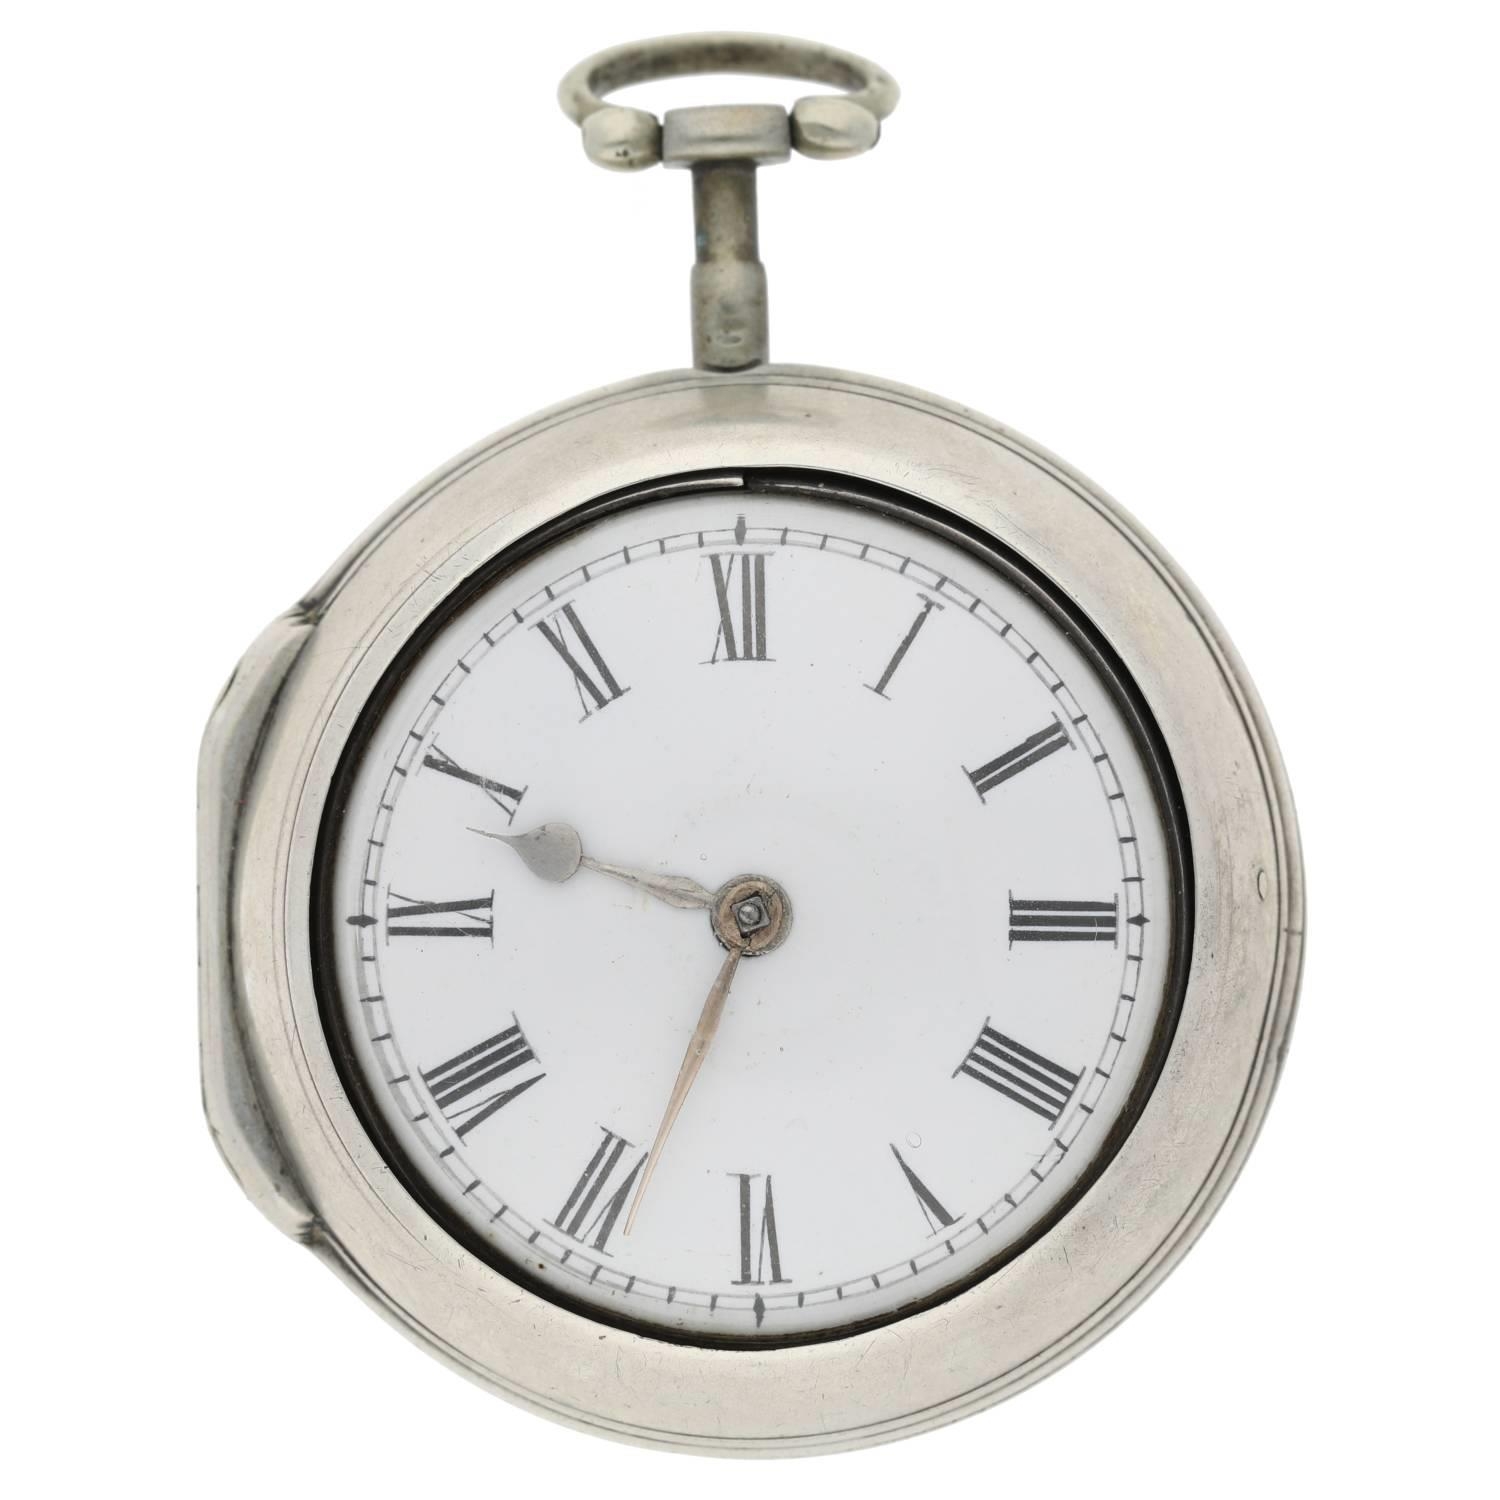 Chas. Robotham, Leicester - English 18th century silver pair cased verge pocket watch, London - Image 2 of 10